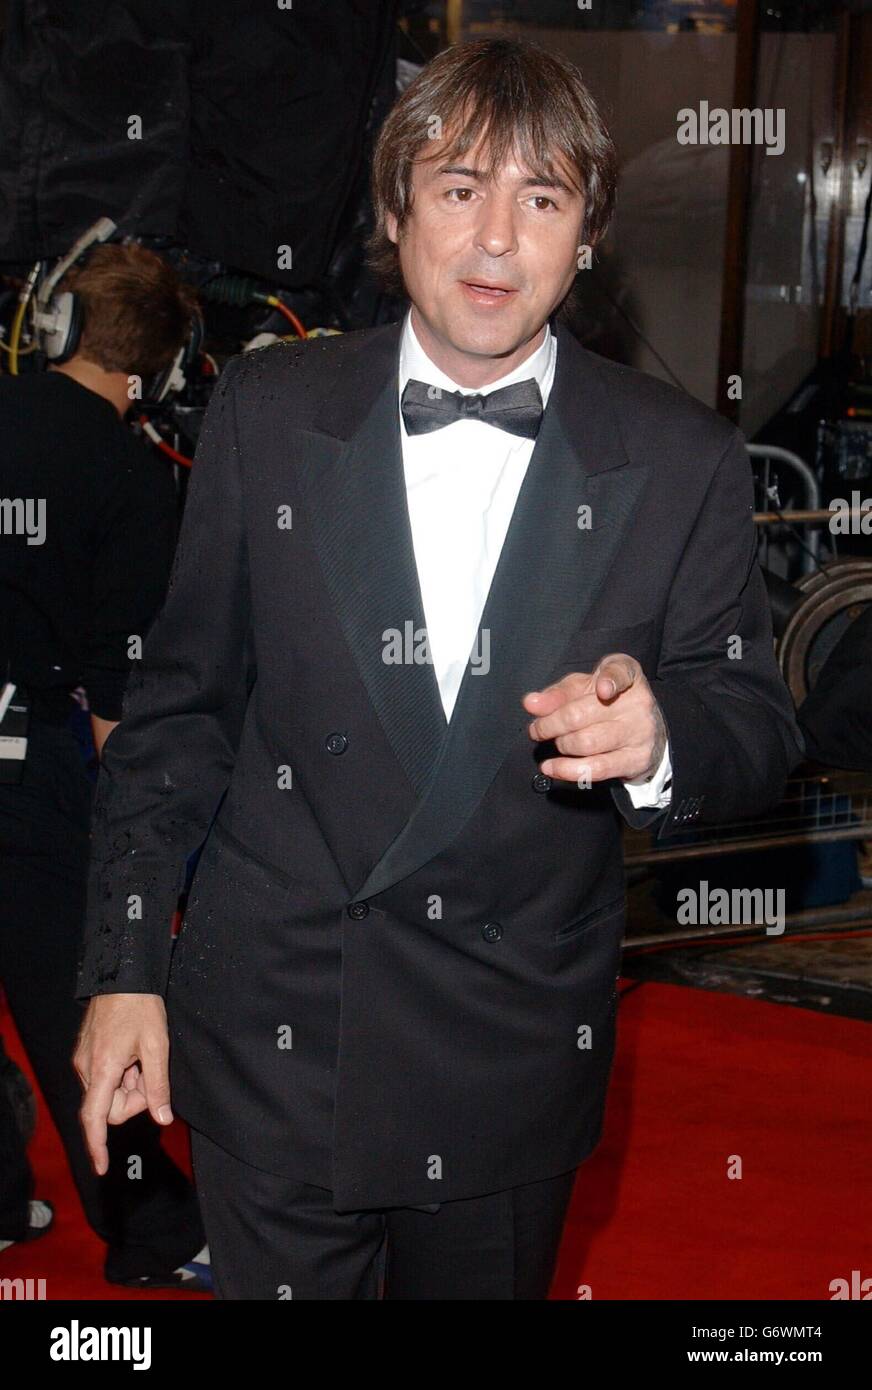 Actor Neil Morrisey arrives for the British Academy Television Awards (BAFTA) - sponsored by Radio Times - at Grosvenor House Hotel in Park Lane, central London. Stock Photo